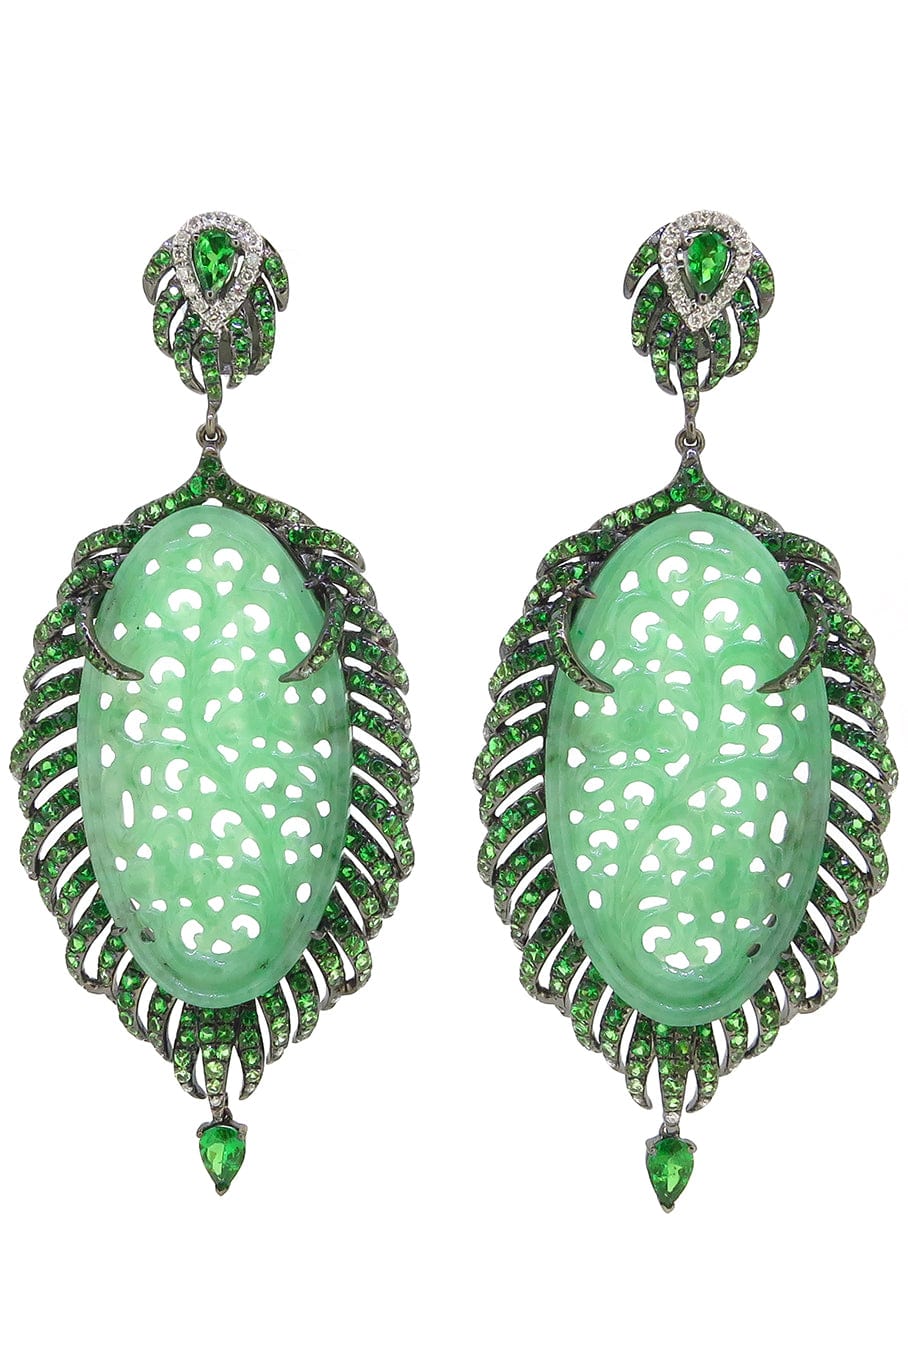 WENDY YUE-Carved Jade and Tsavorite Earrings-WHITE GOLD